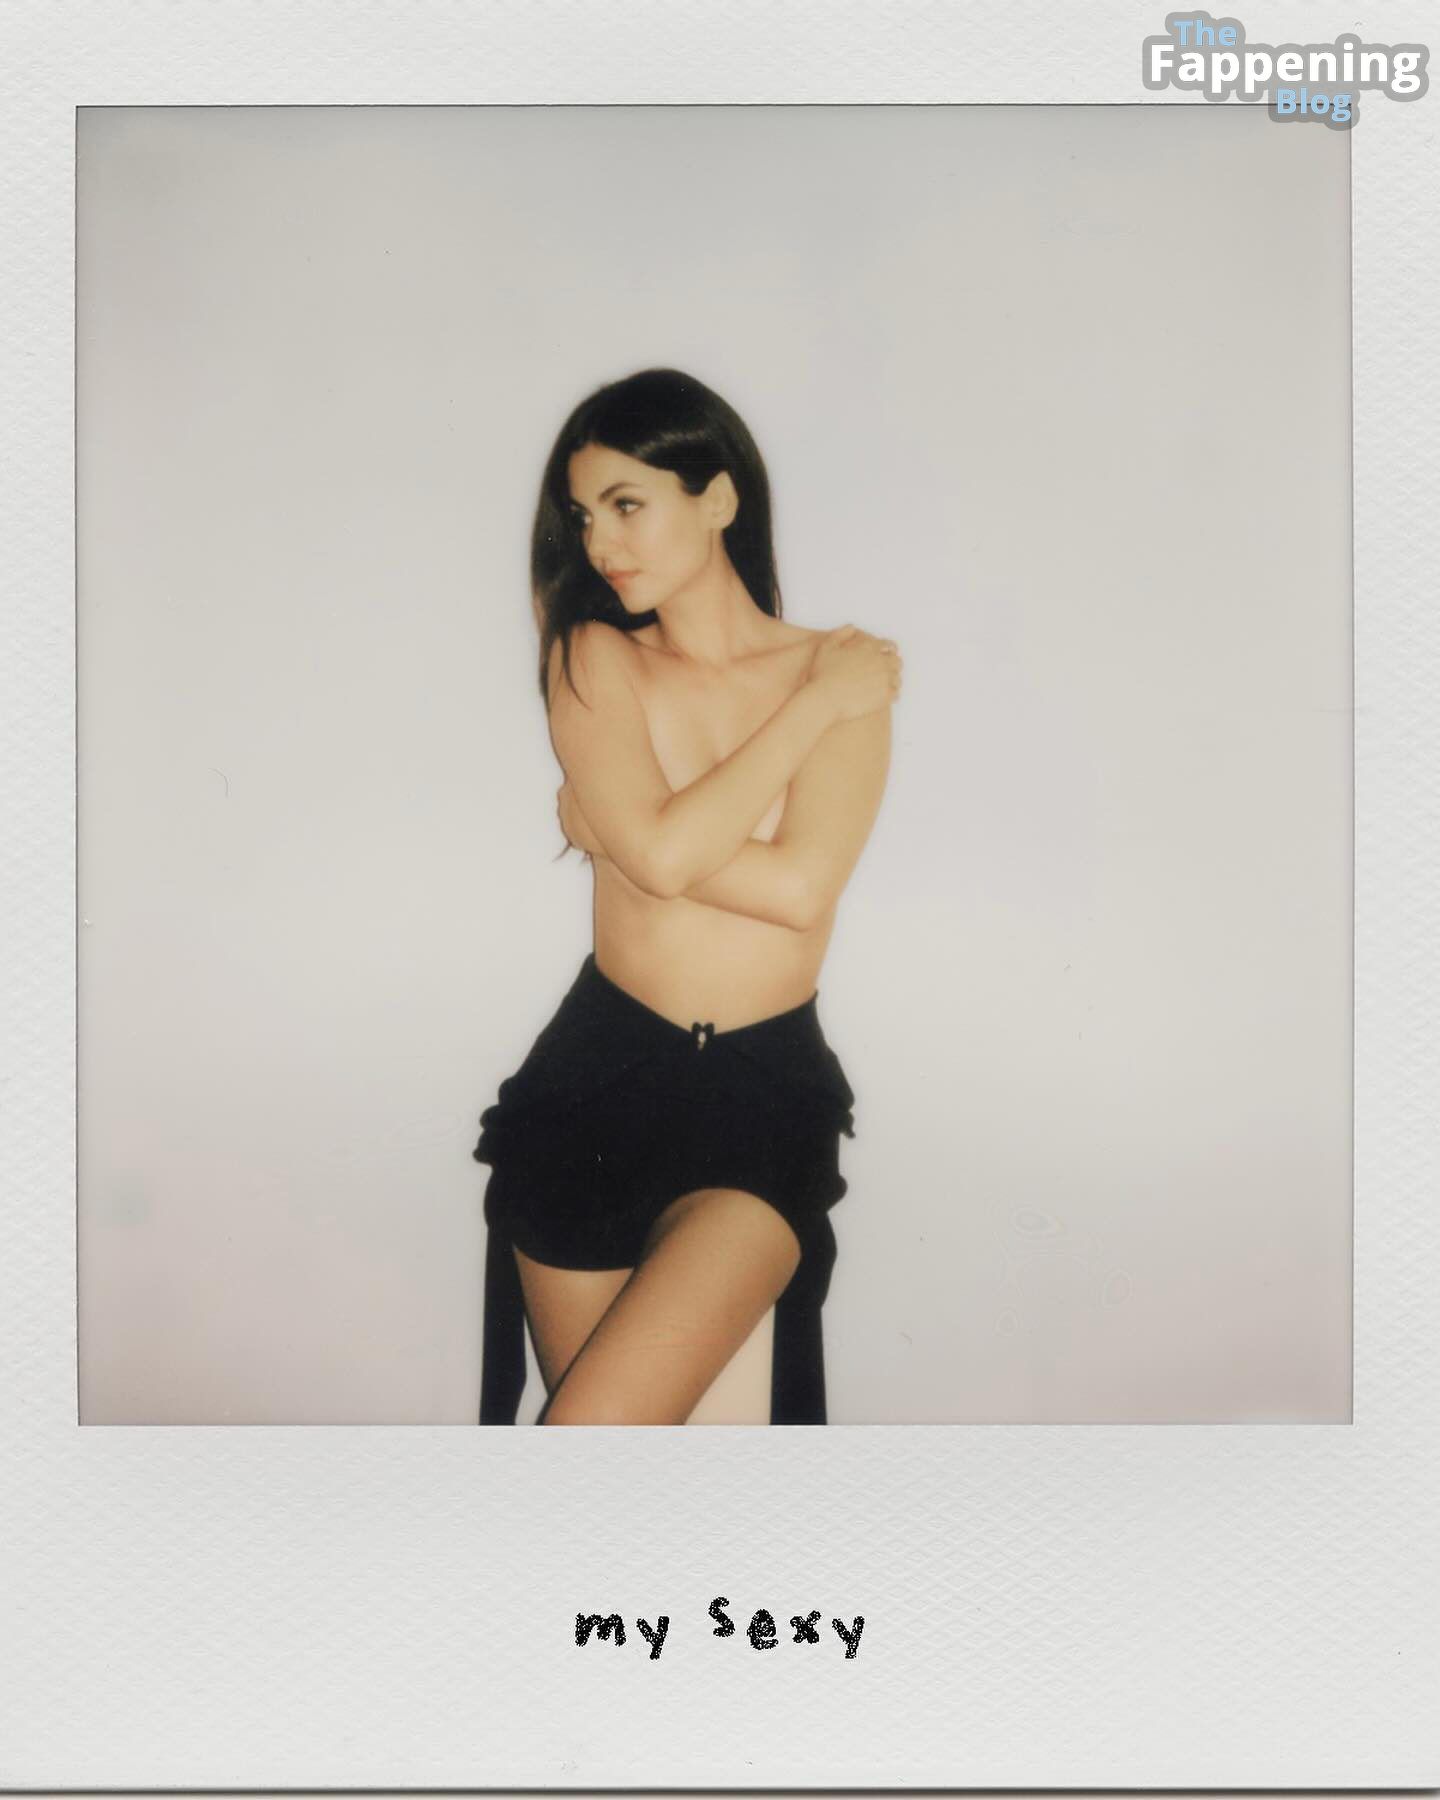 victoria-justice-topless-black-dress-sultry-polaroids-2-1-thefappeningblog.com_.jpg